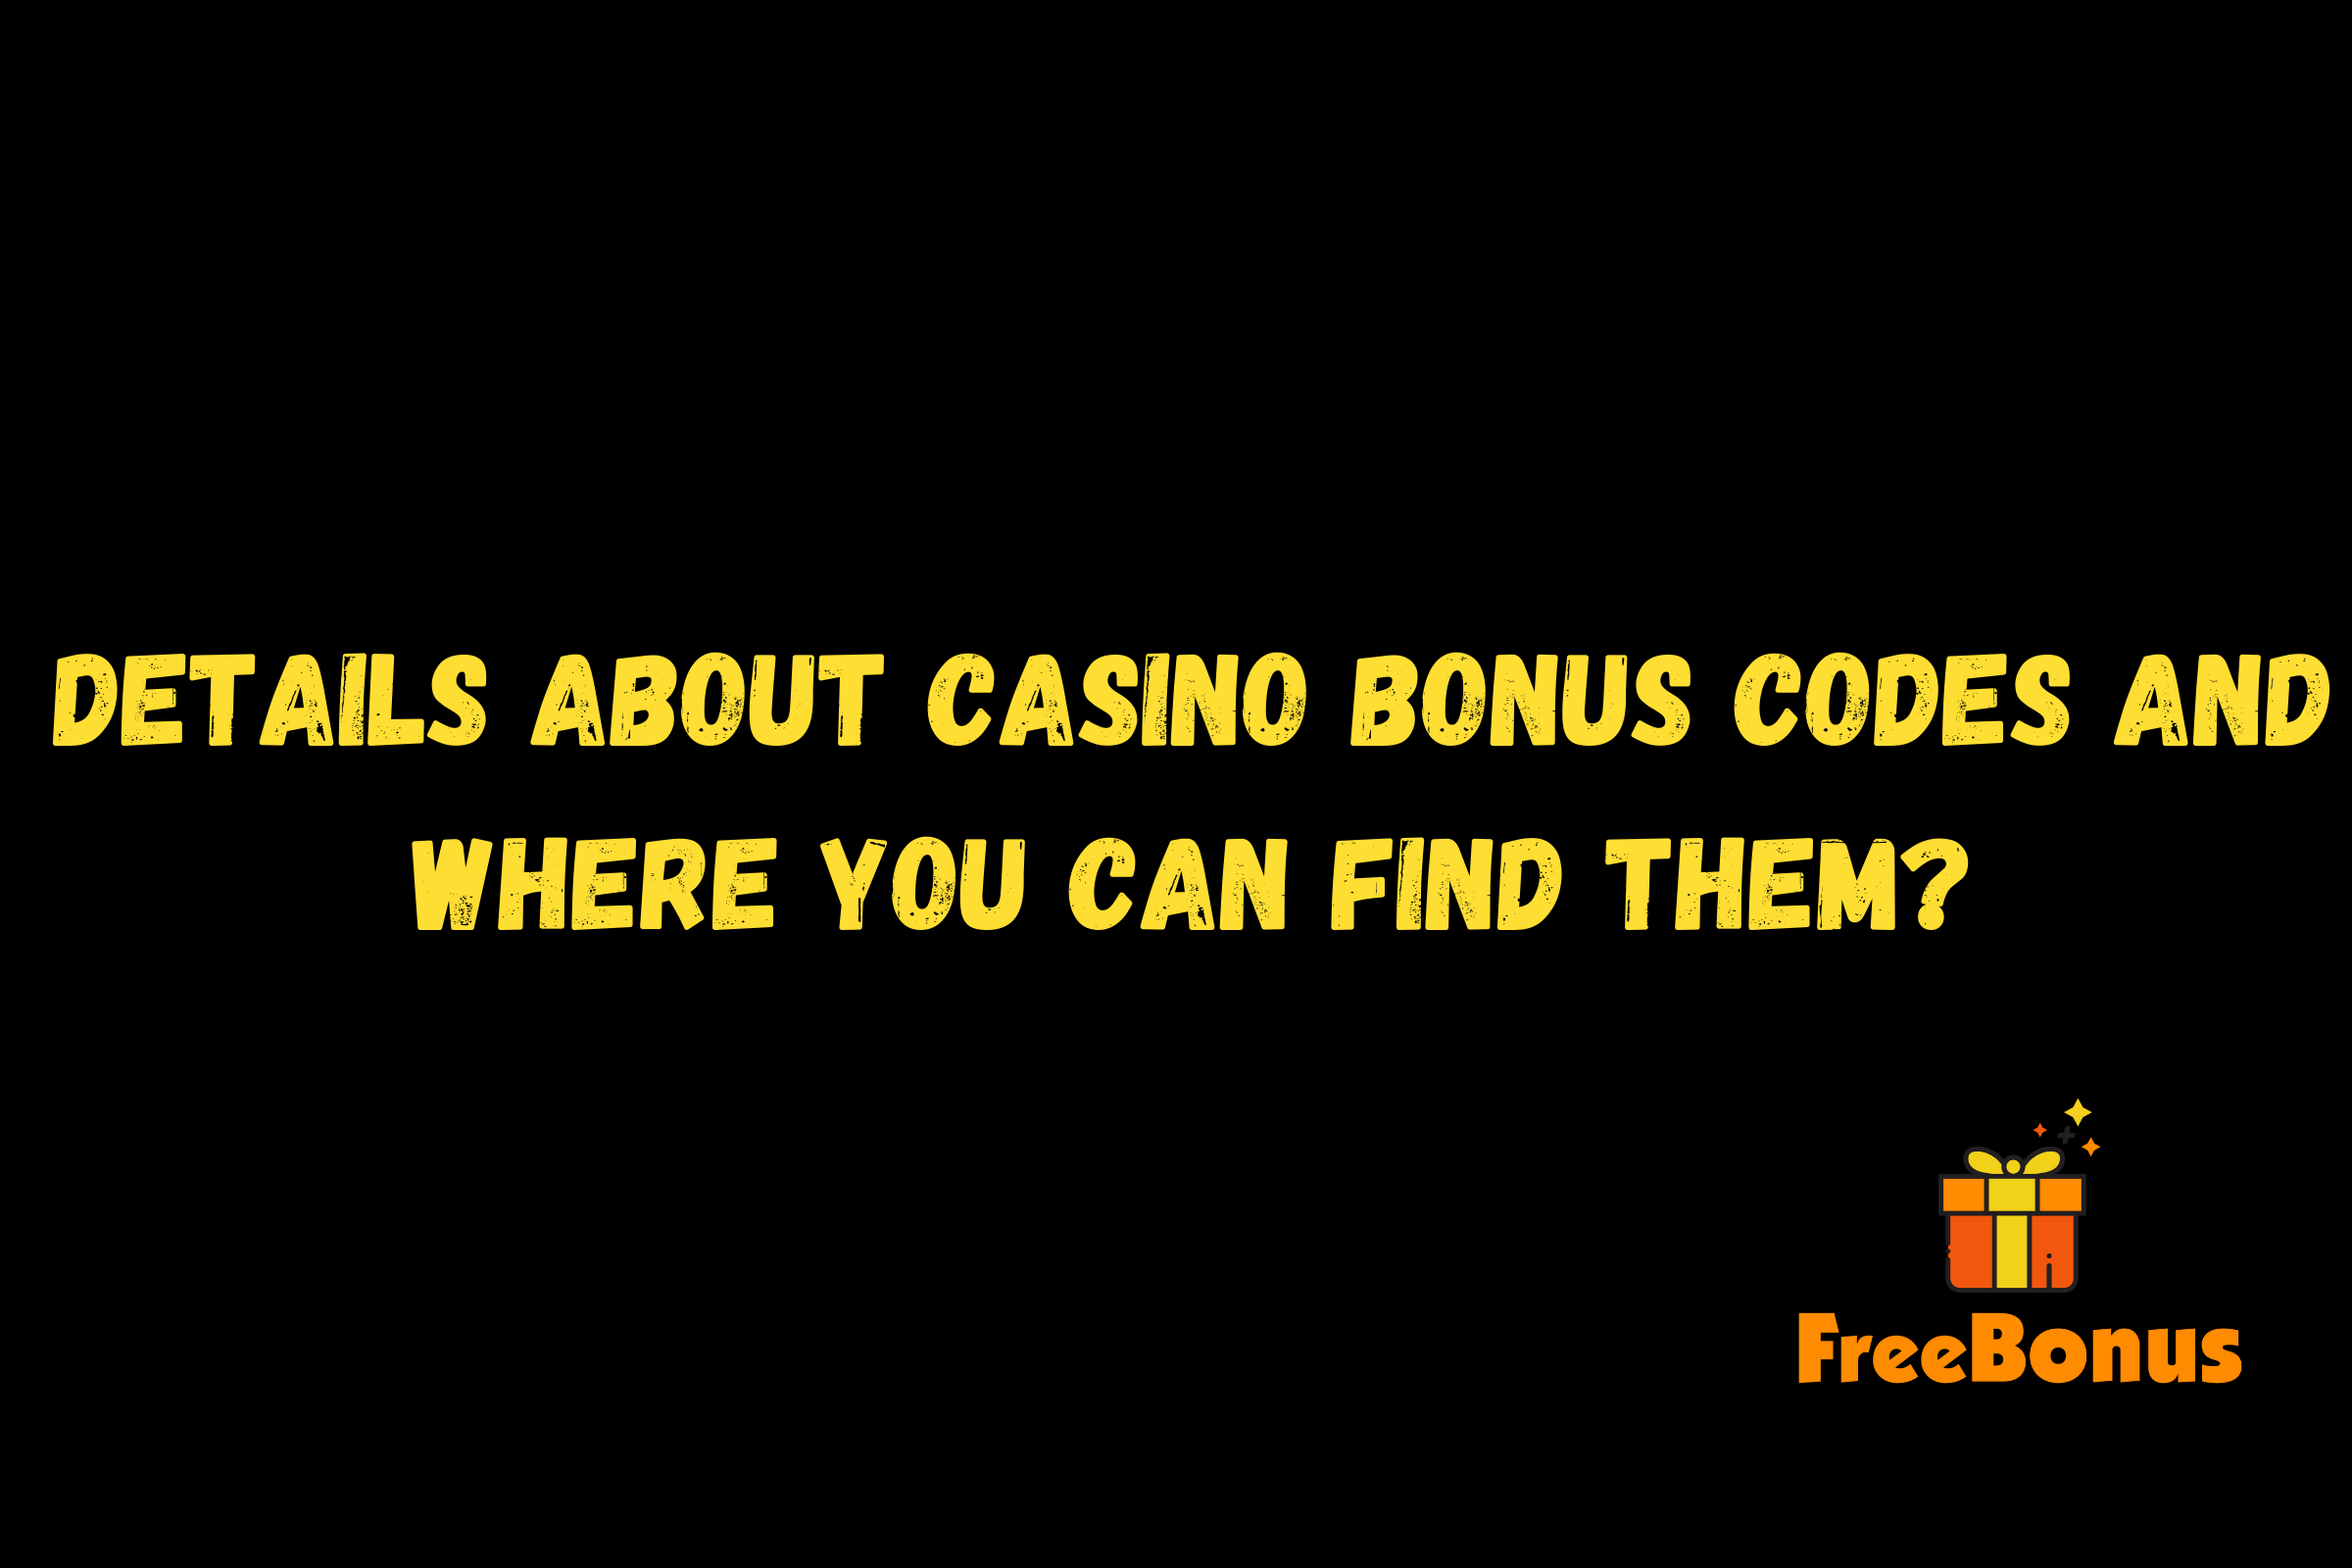 Details about casino bonus codes and where you can find them